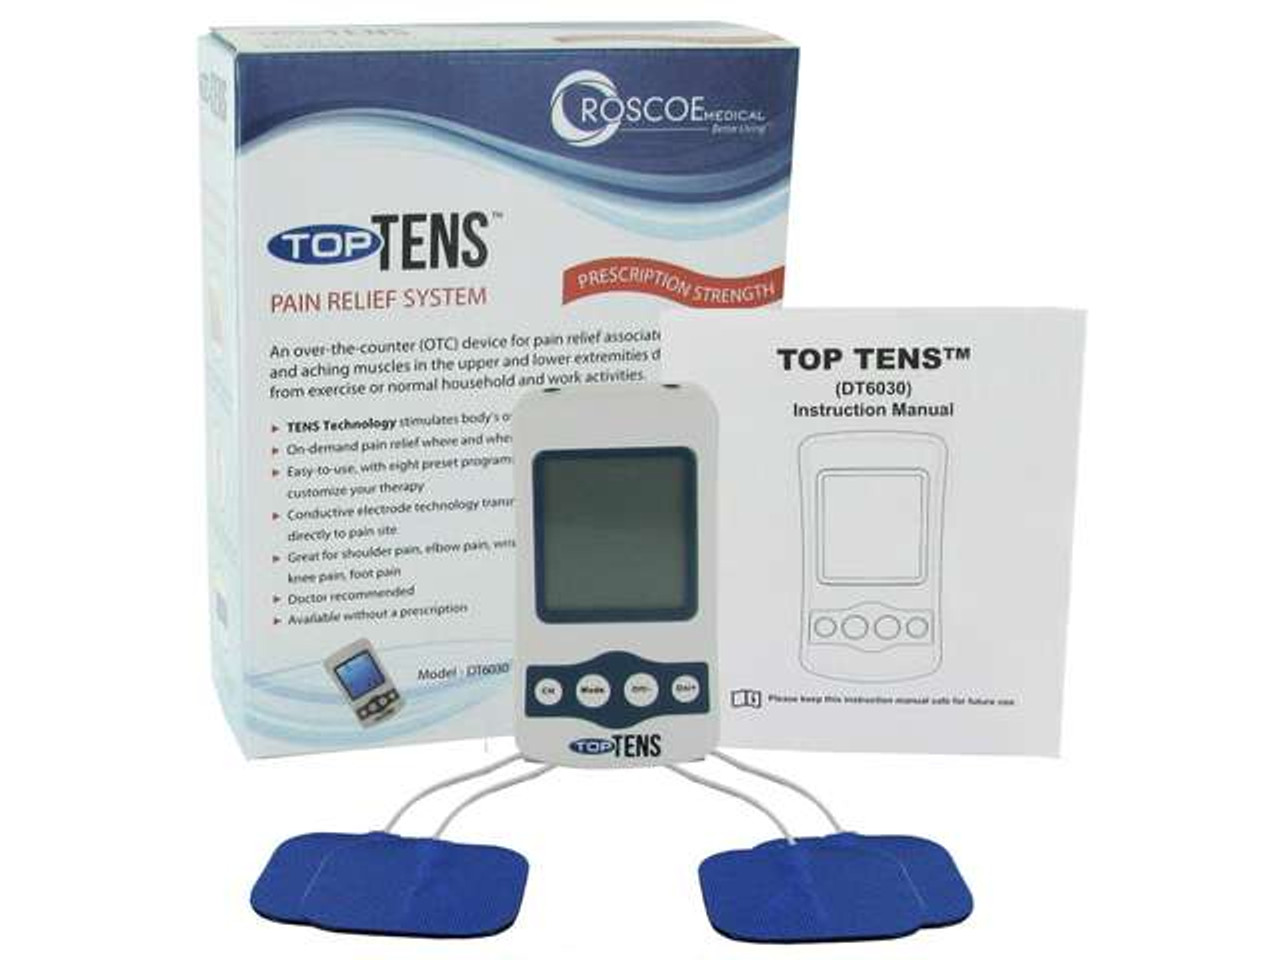 Discount TENS Pain Relieving Devices in Pain management 